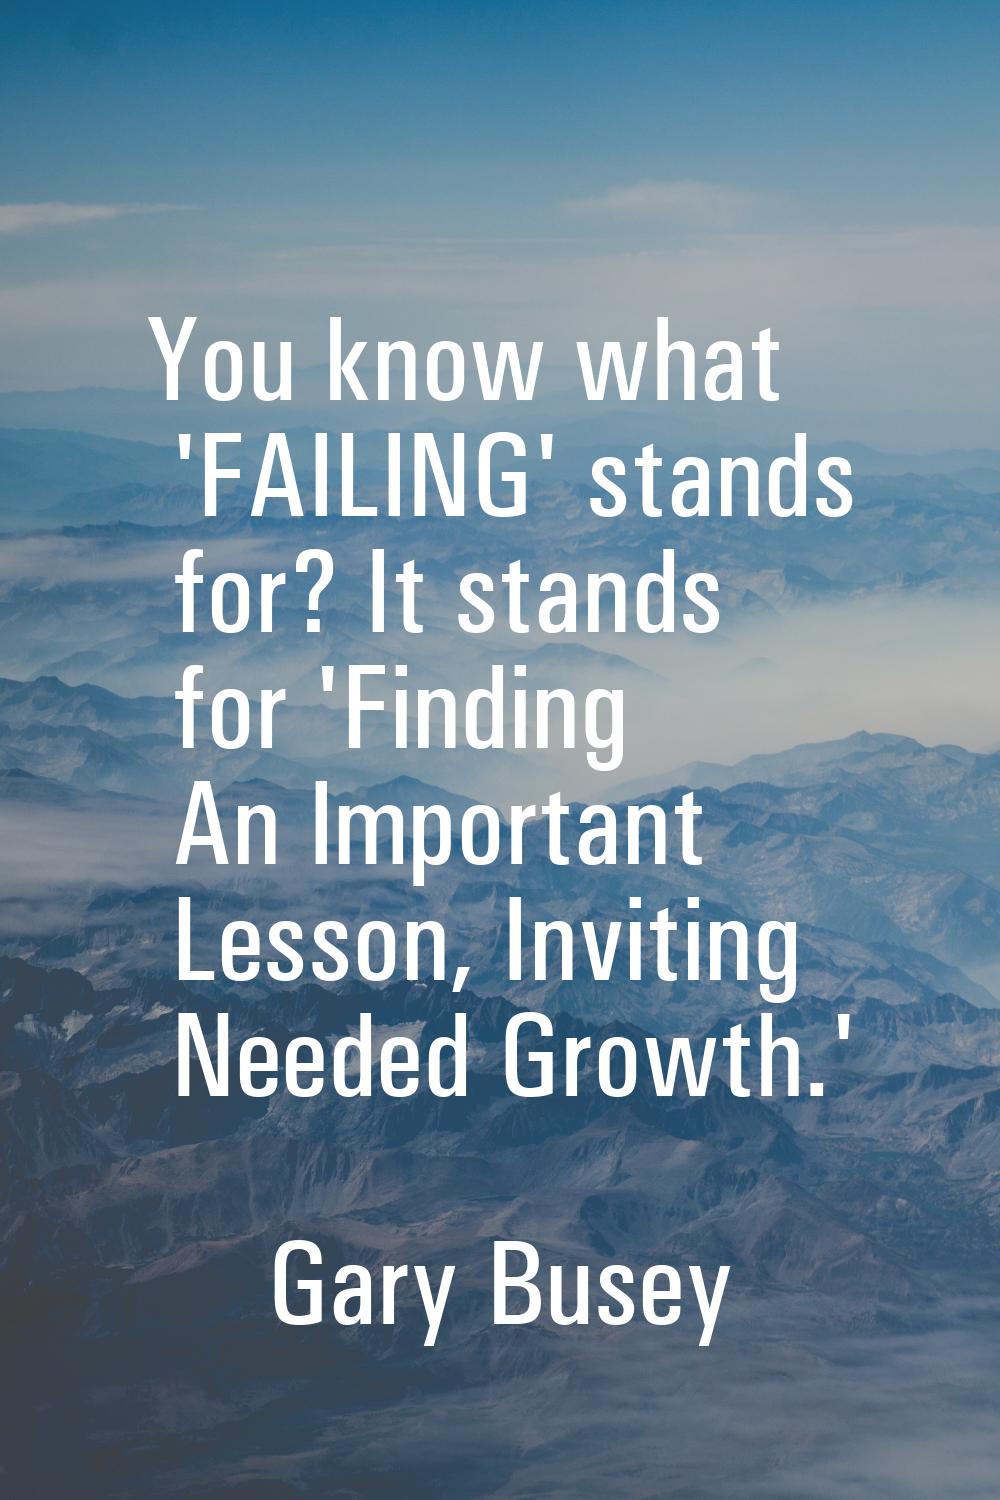 You know what 'FAILING' stands for? It stands for 'Finding An Important Lesson, Inviting Needed Gro